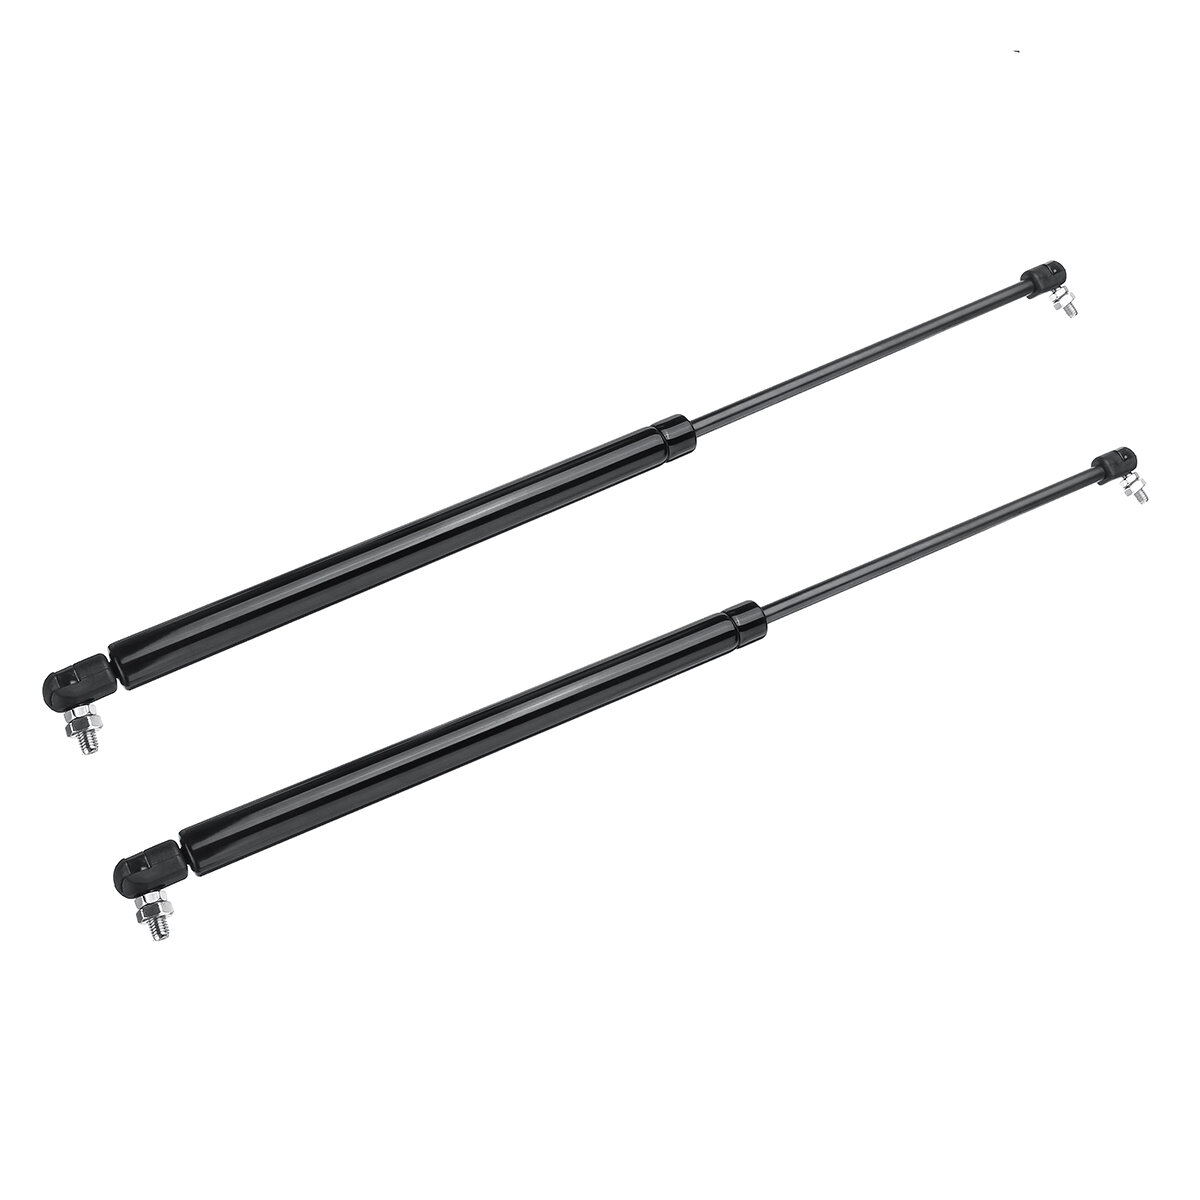 2Pcs 60cm Car Rear Tailgate Boot Gas Struts Supports Shock Lifter For Caravan for Camper Trailer